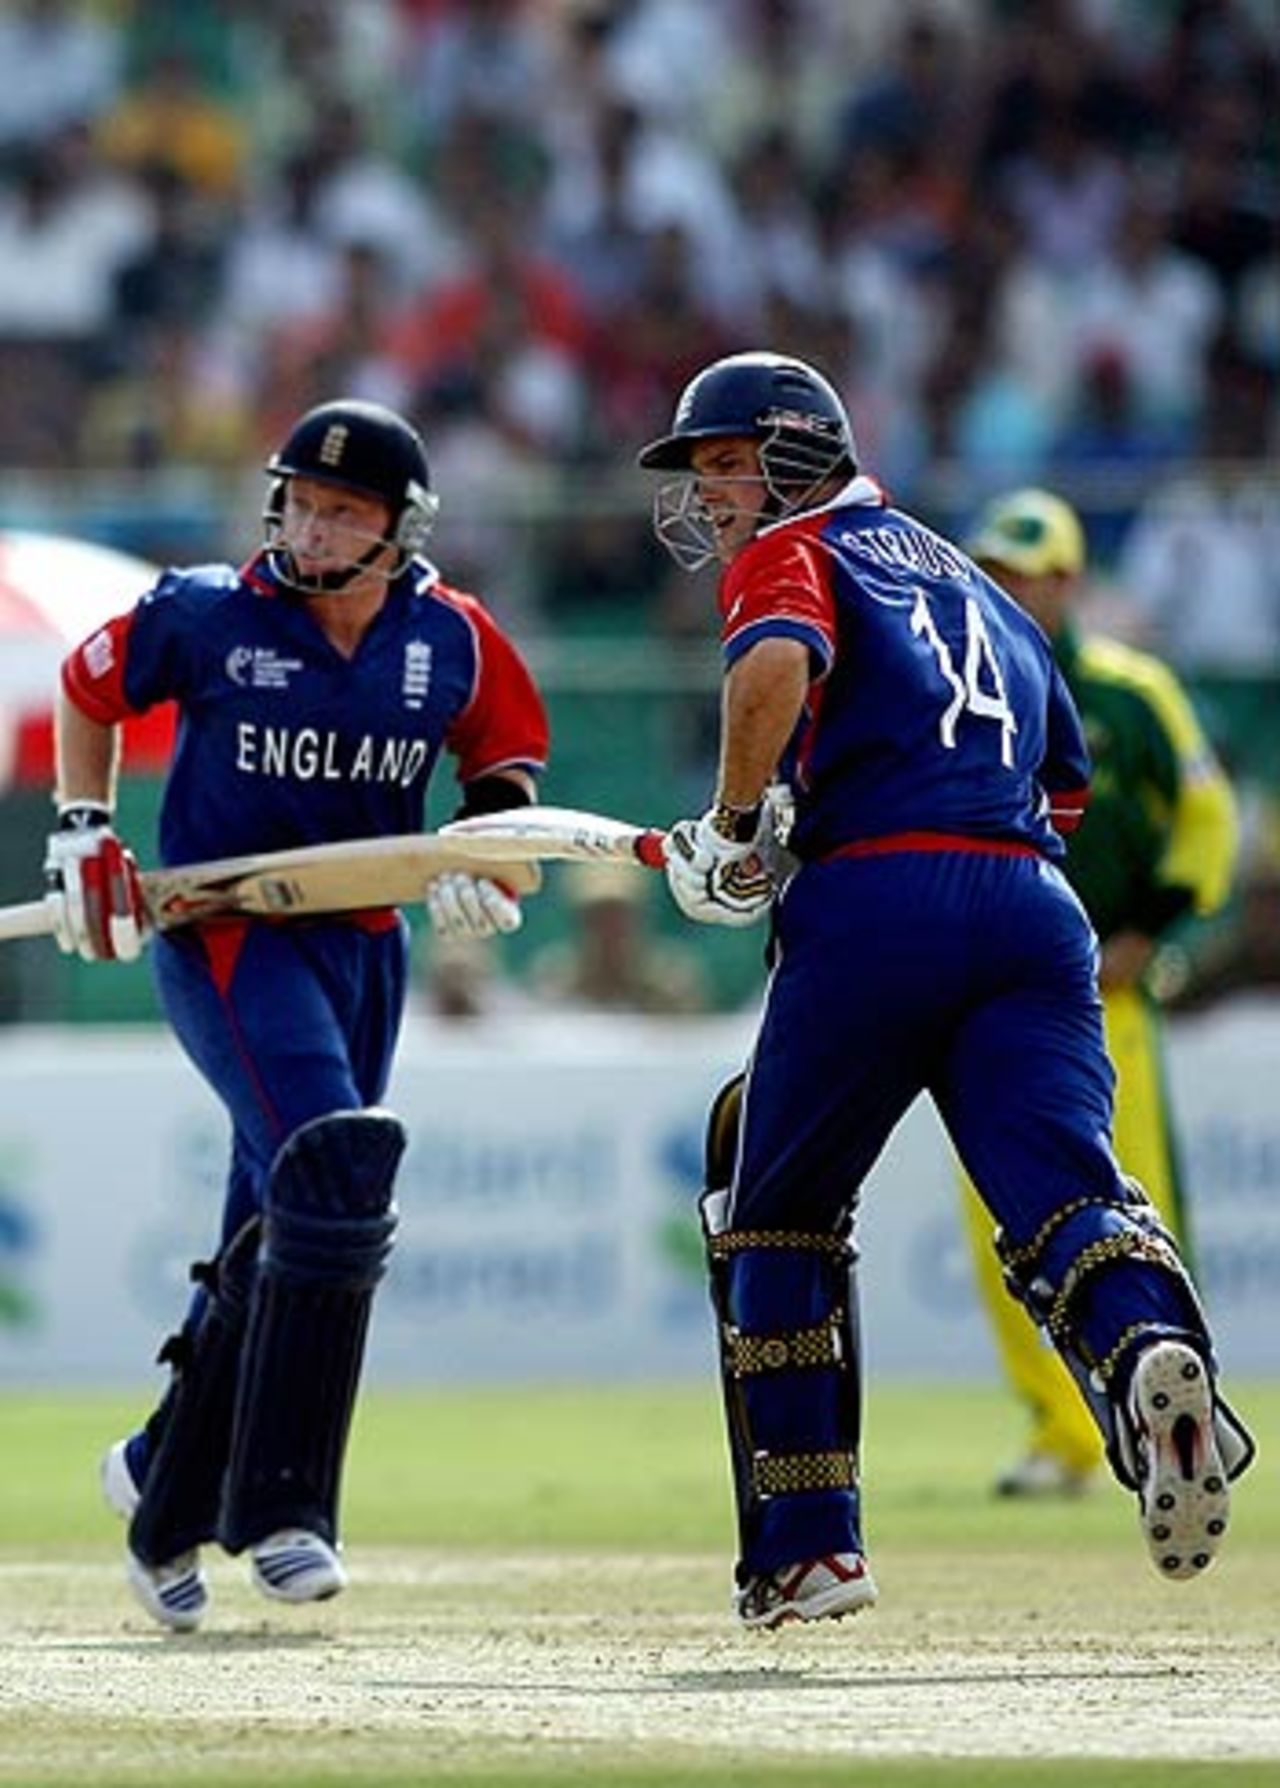 Ian Bell and Andrew Strauss put on 83, Australia v England, 6th match, Champions Trophy, Jaipur, October 21, 2006